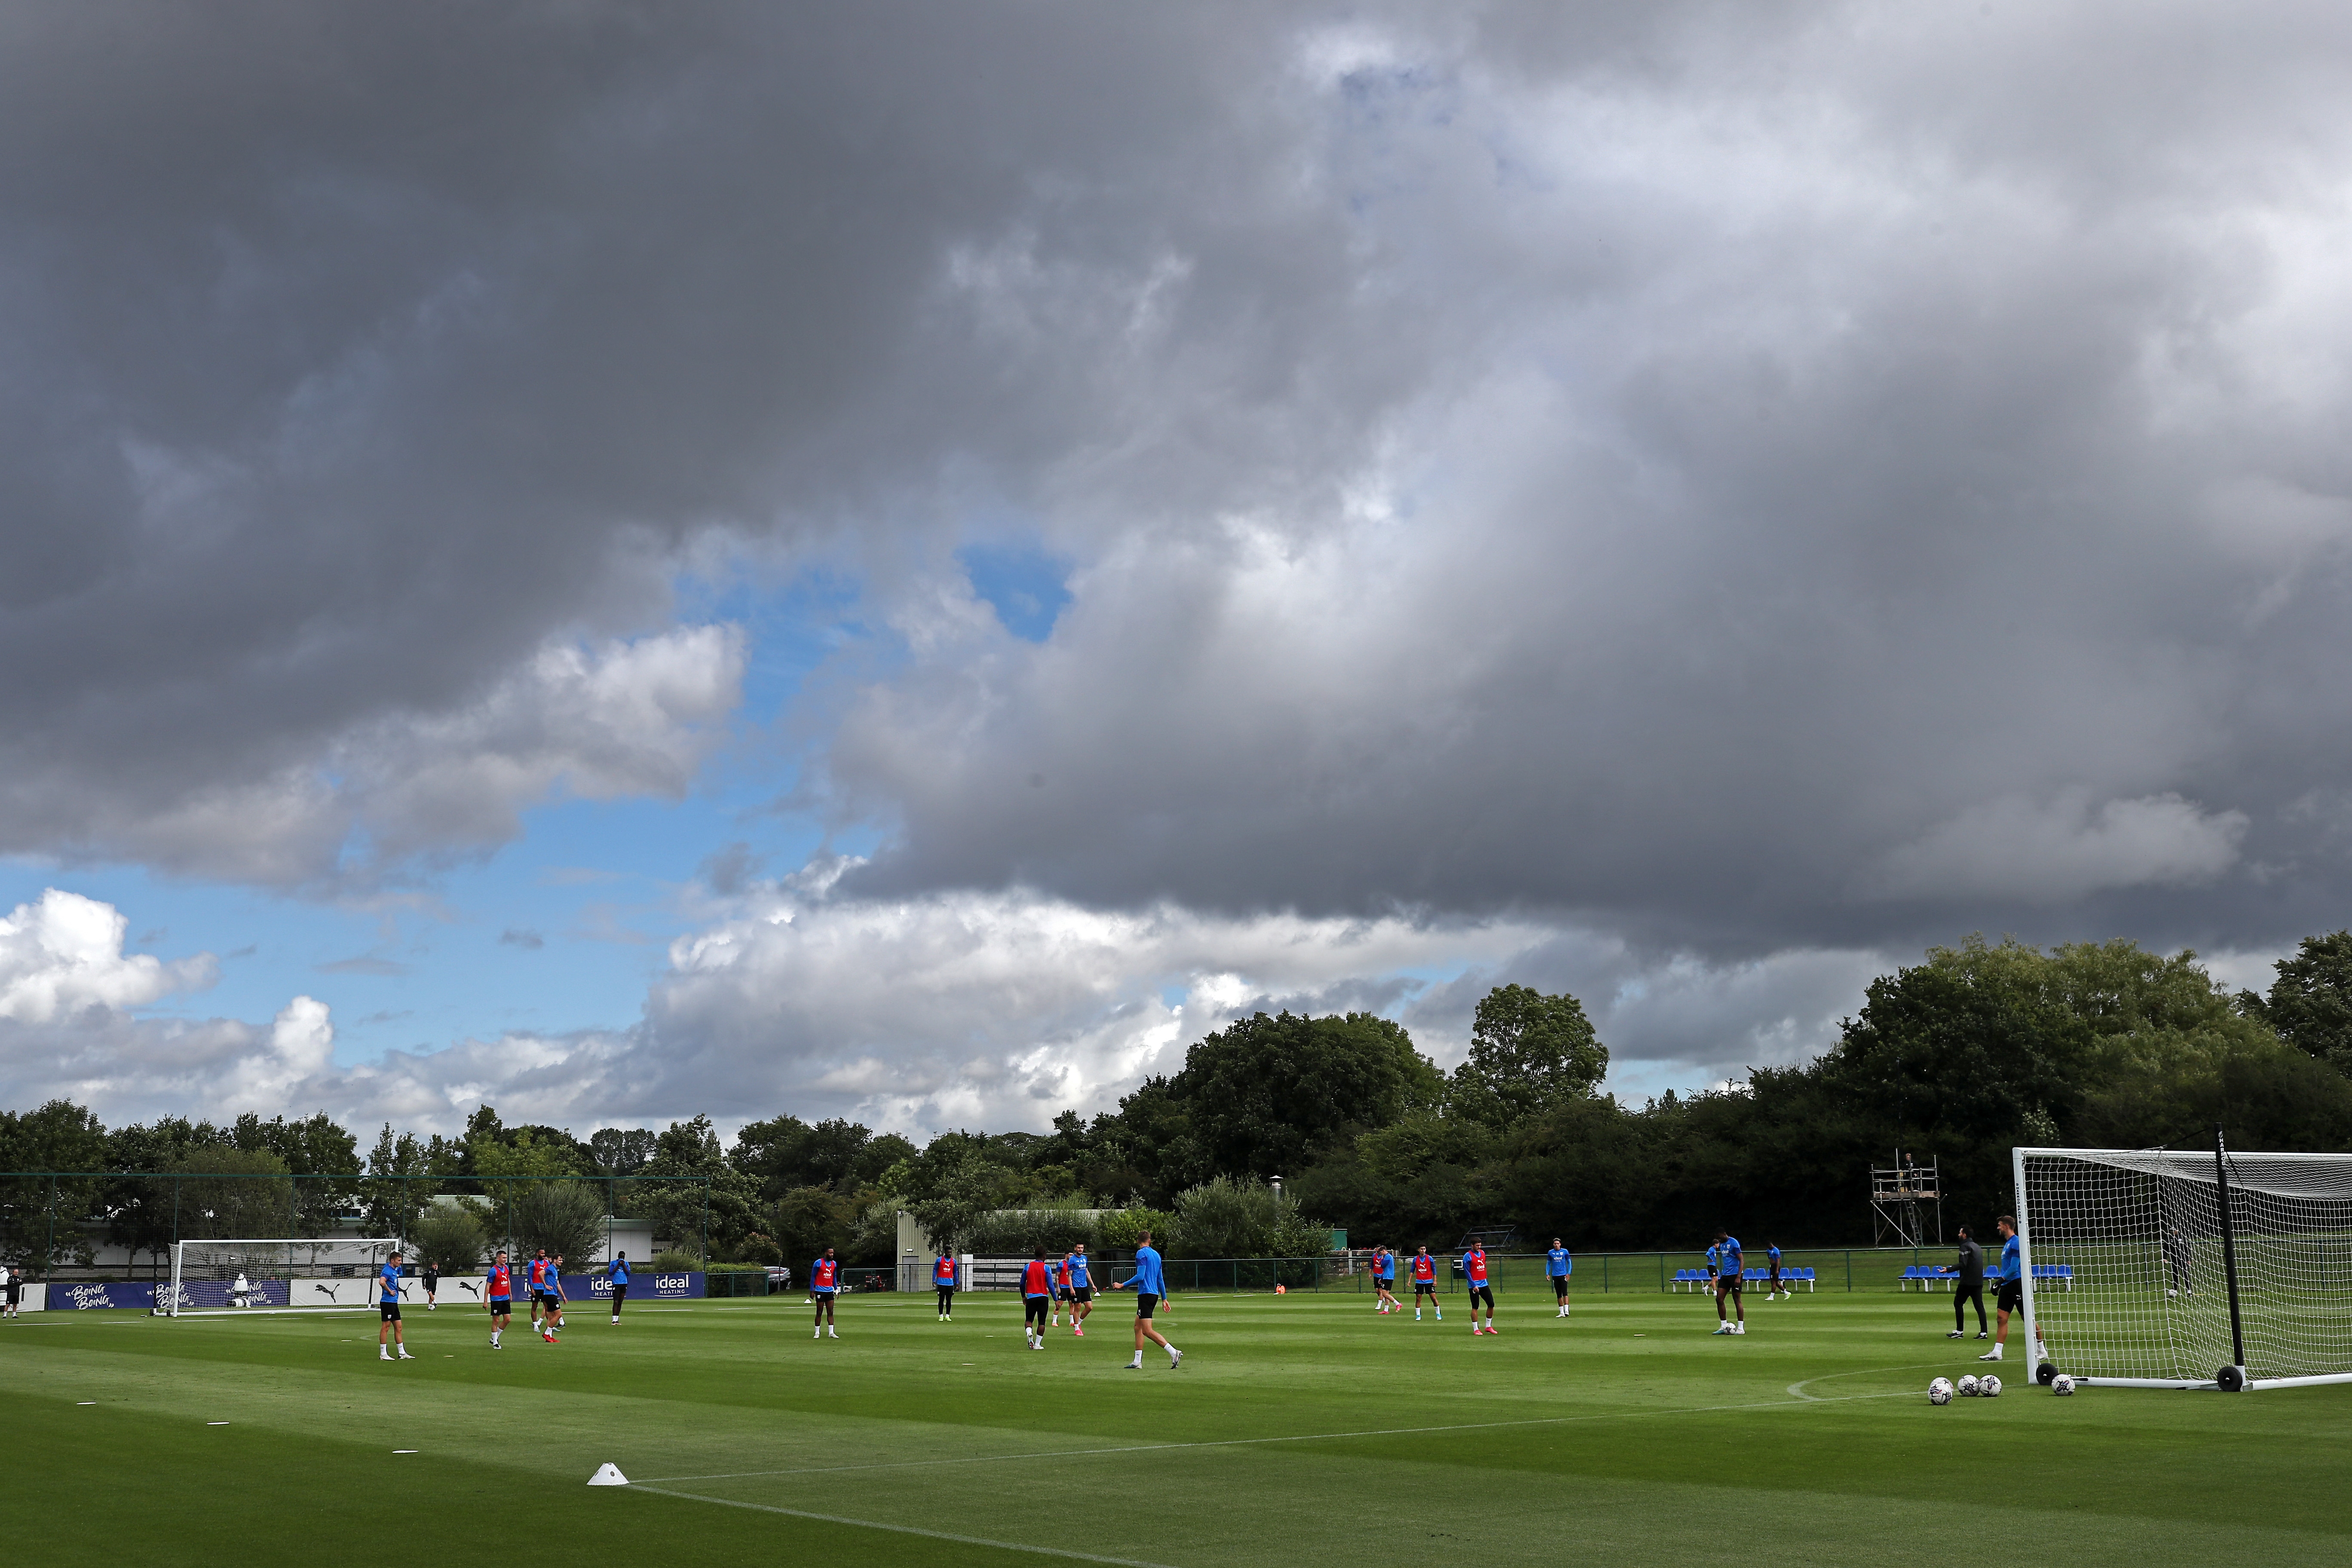 A wide angle of the training pitch with several players in the background